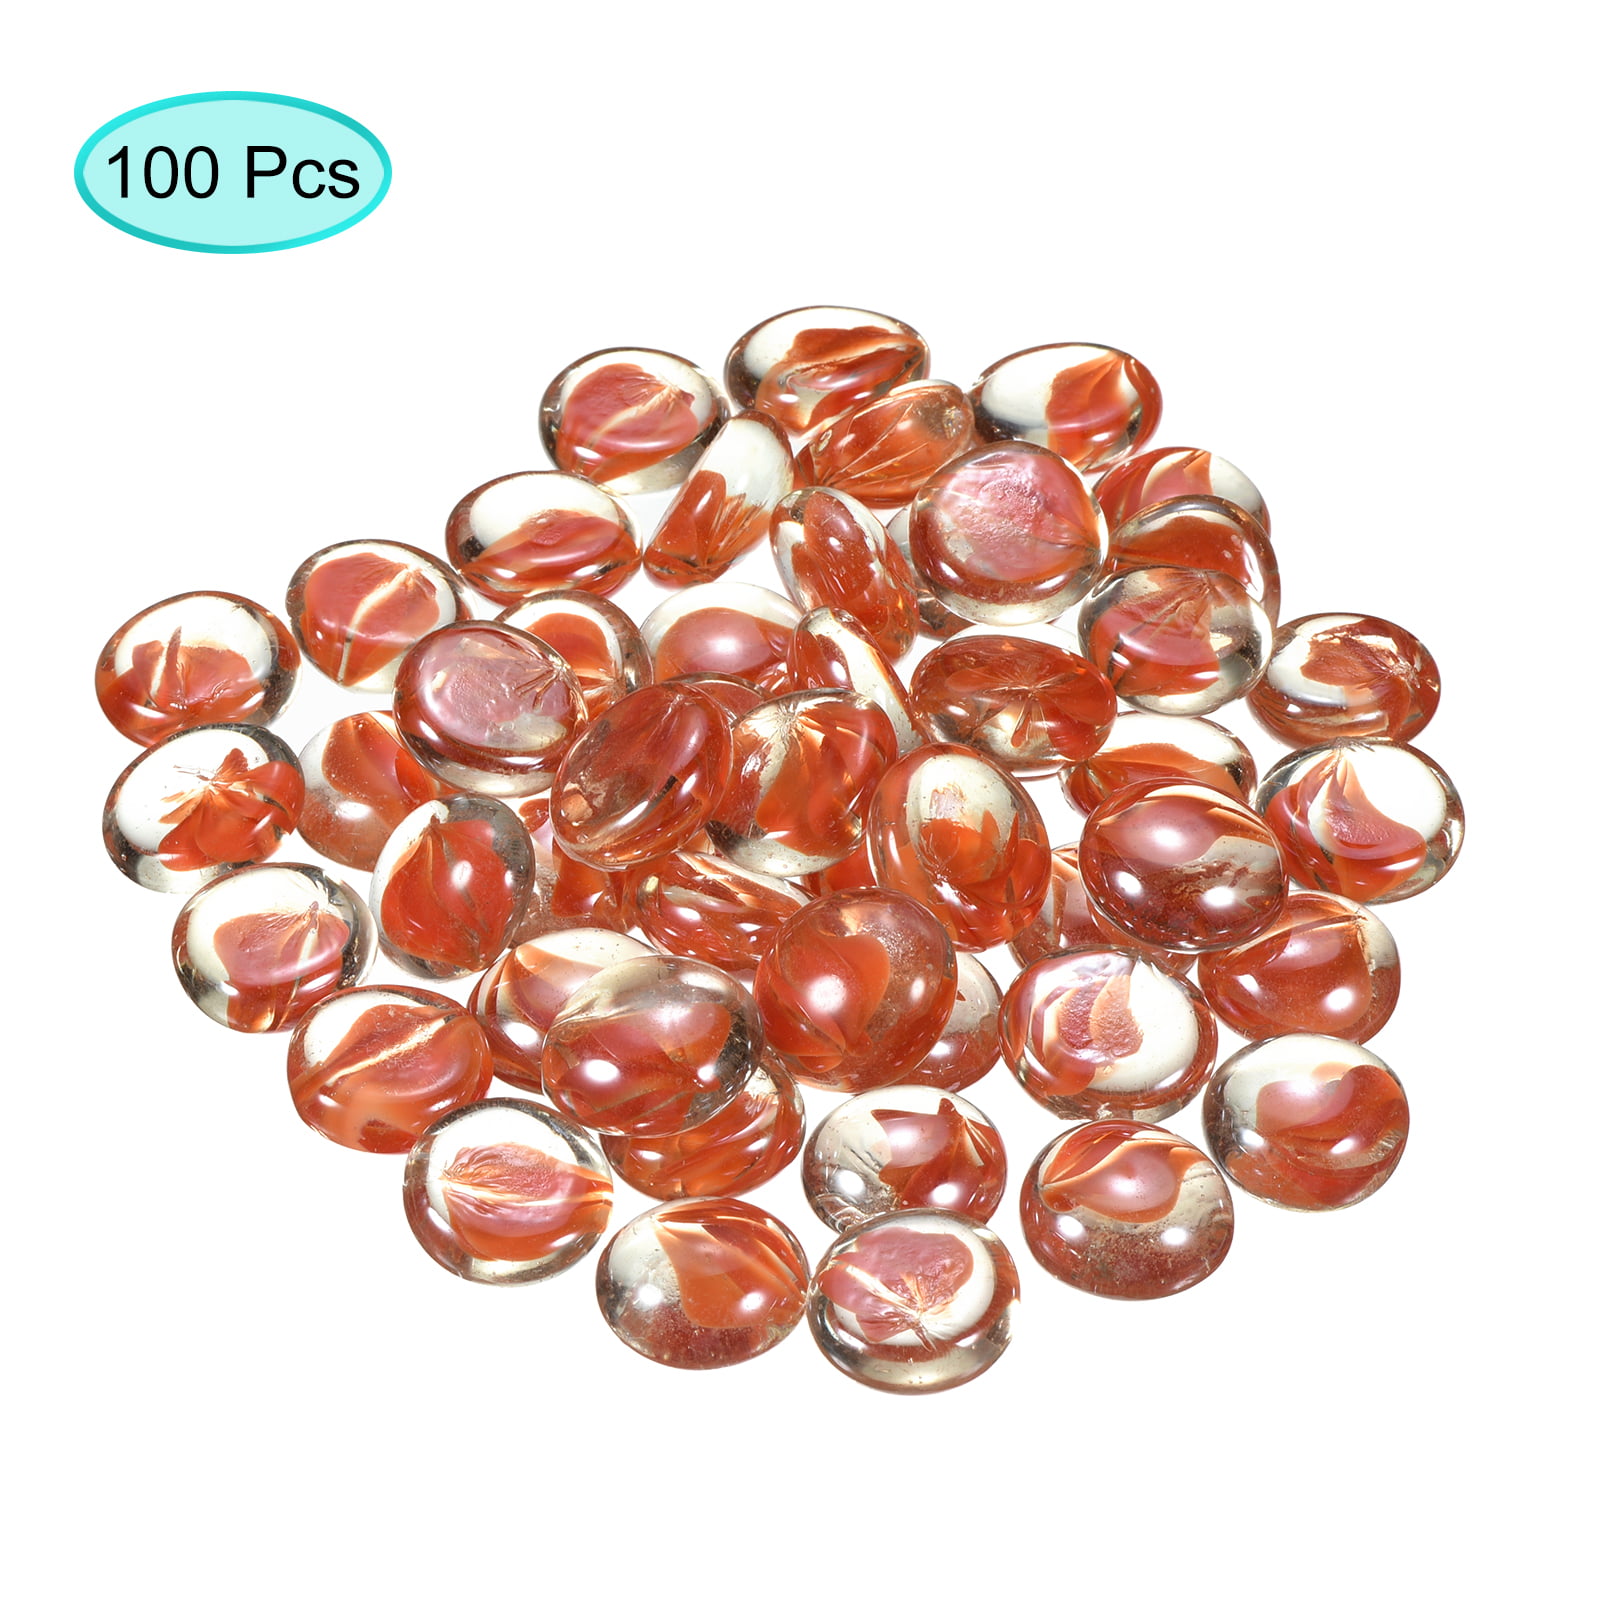 Red Glass Marbles 